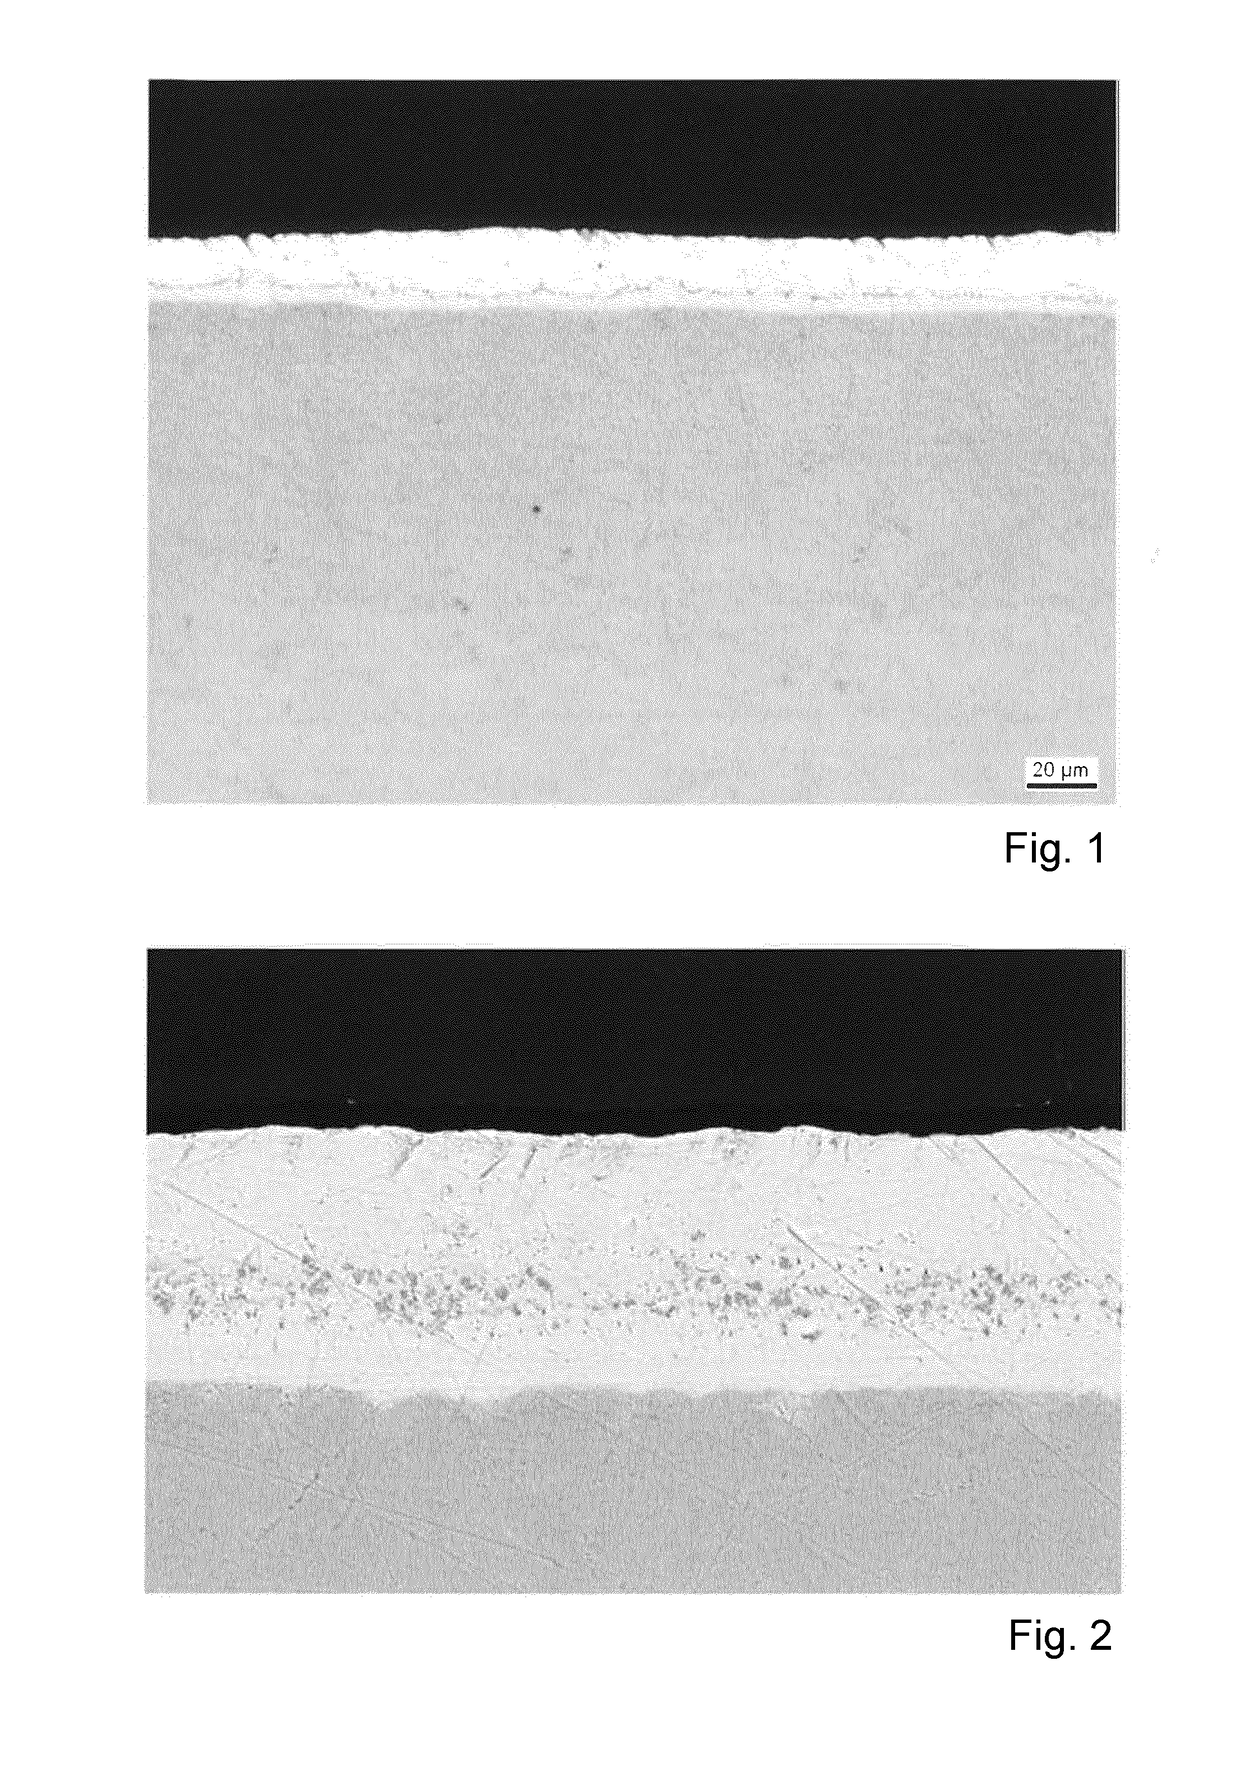 Method for producing an Anti-corrosion coating for hardenable sheet steels and an Anti-corrosion coating for hardenable sheet steels